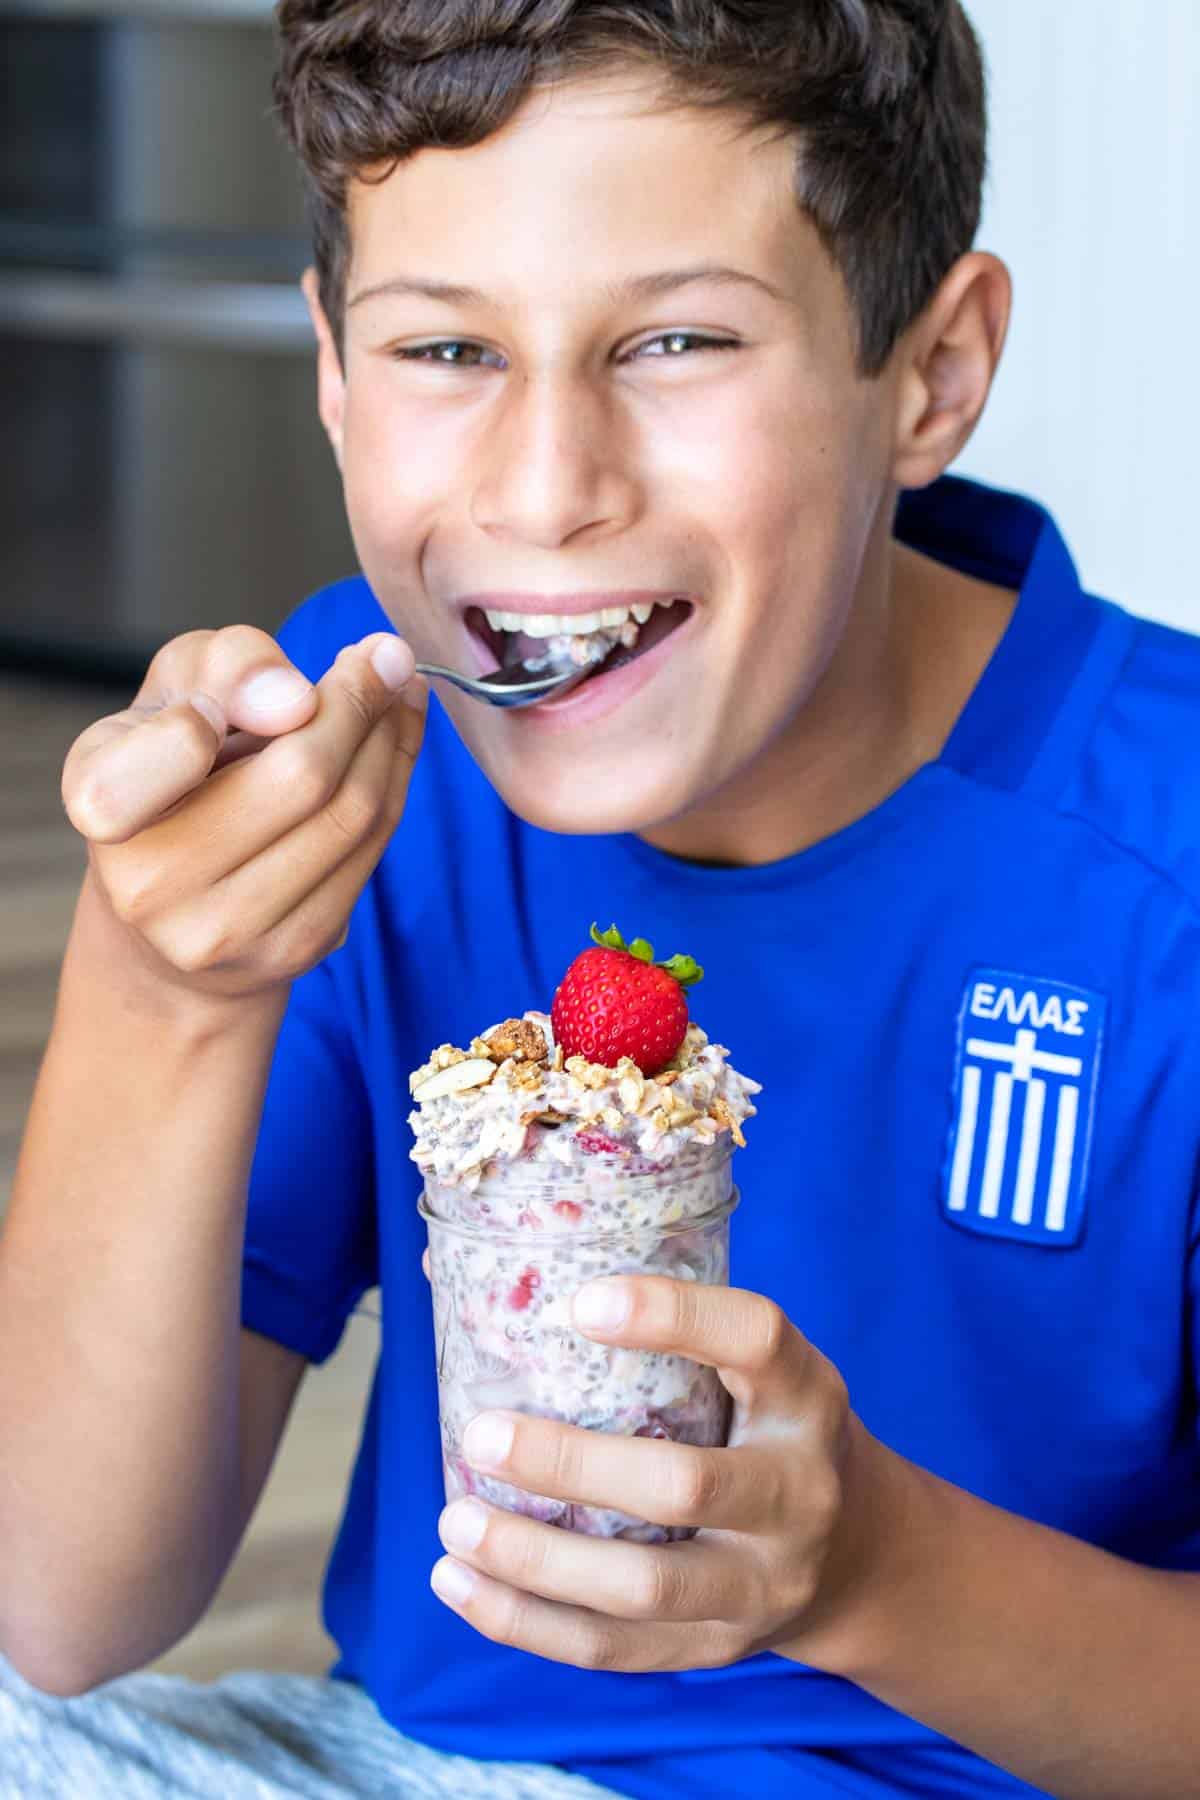 Boy in blue shirt smiling and eating from a jar of overnight oats